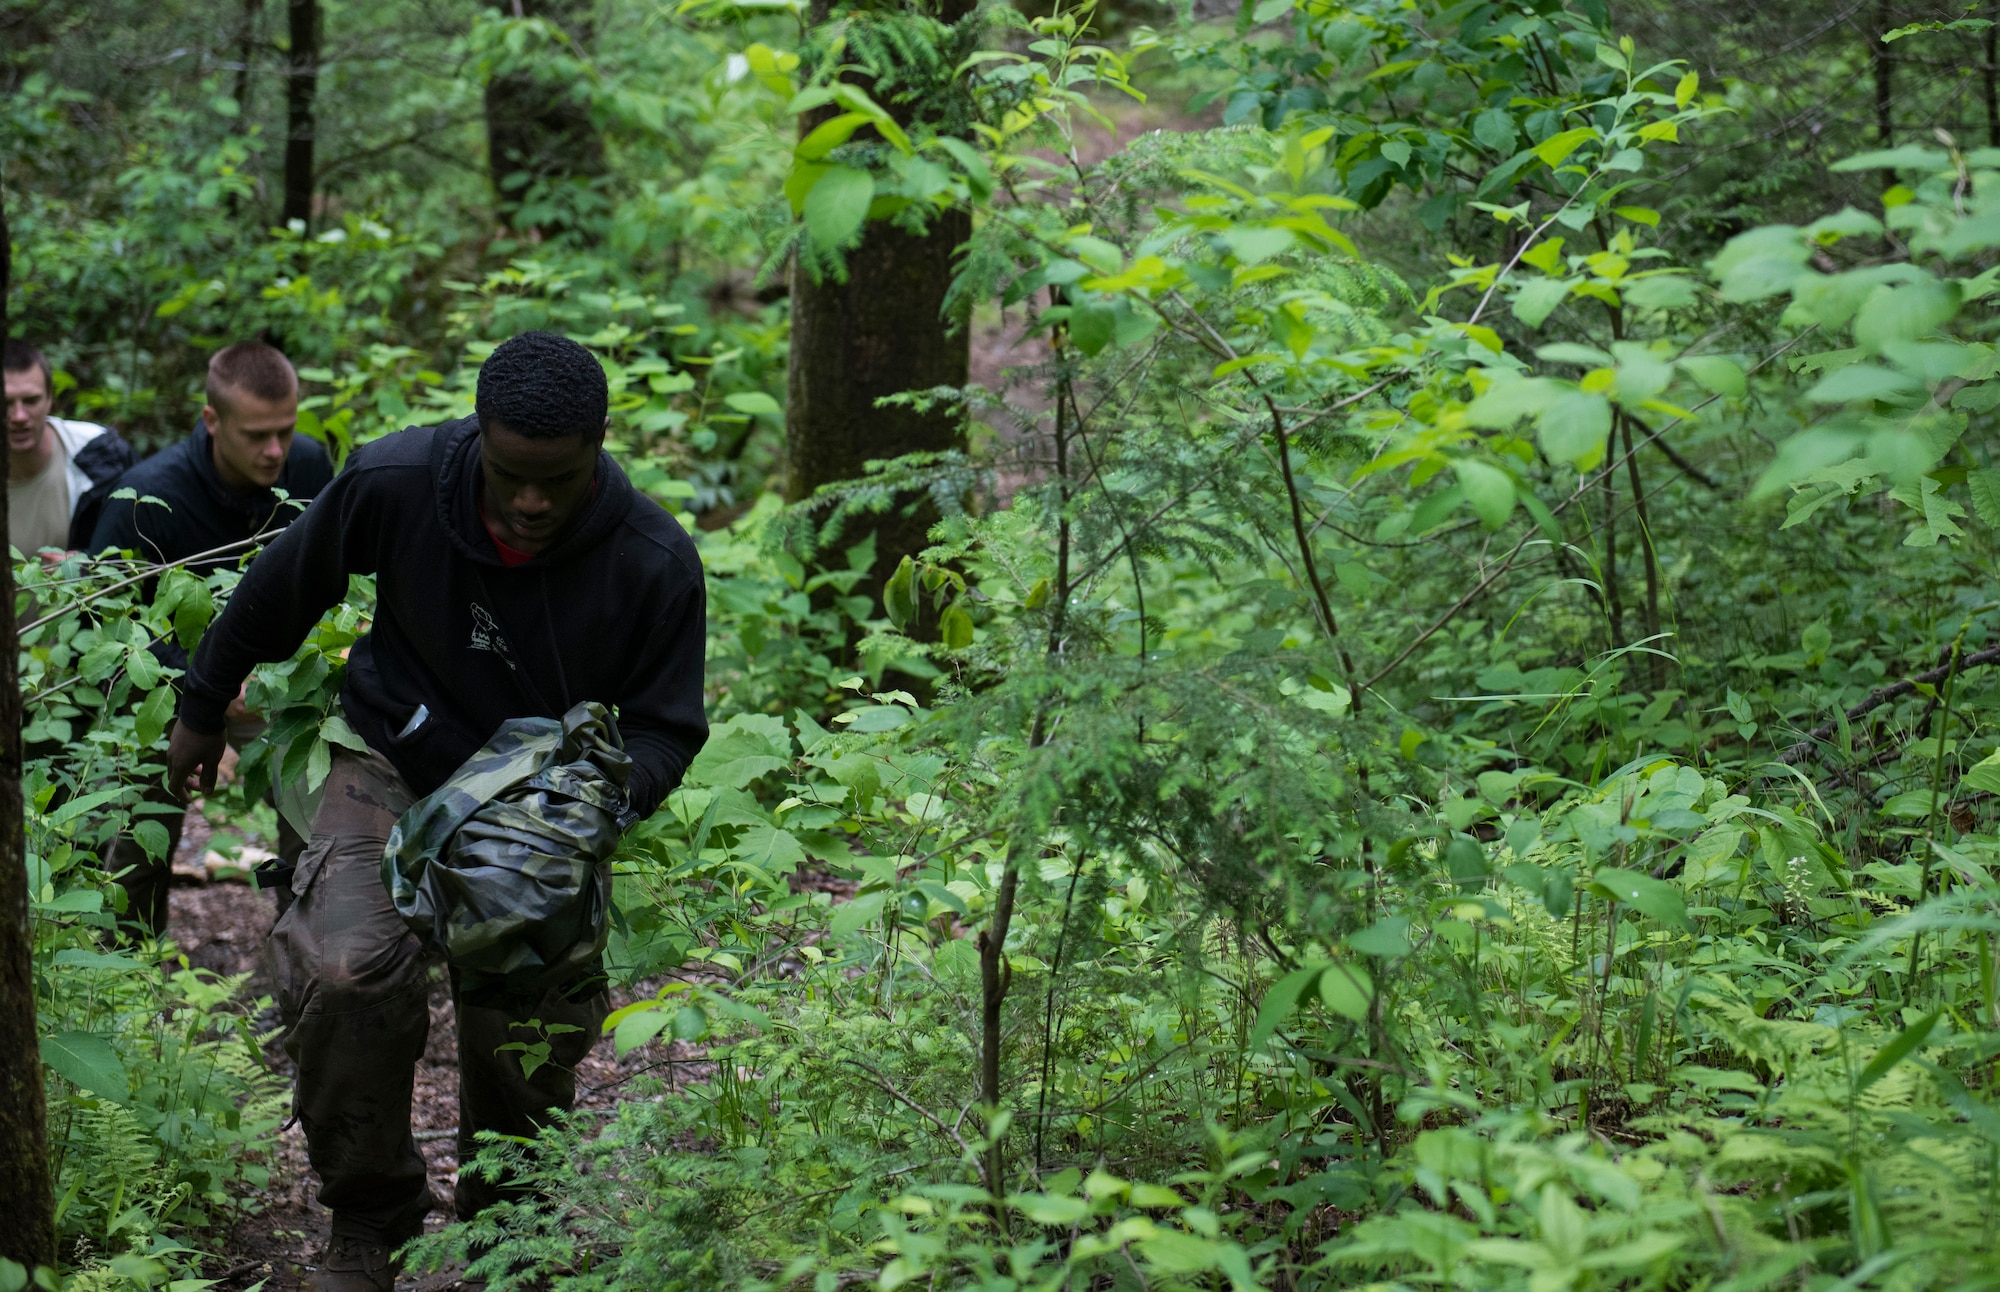 Airman 1st Class Omari Whiteside, 4th Munitions Squadron precision guided munitions crewmember, leads a group of Airmen up the side of a mountain during combat survival training, near Brevard, North Carolina, May 21, 2020. The training consisted of learning land navigation, living off of the land, creating shelters, evading hostile enemies and more. (U.S. Air Force photo by Senior Airman Kenneth Boyton)